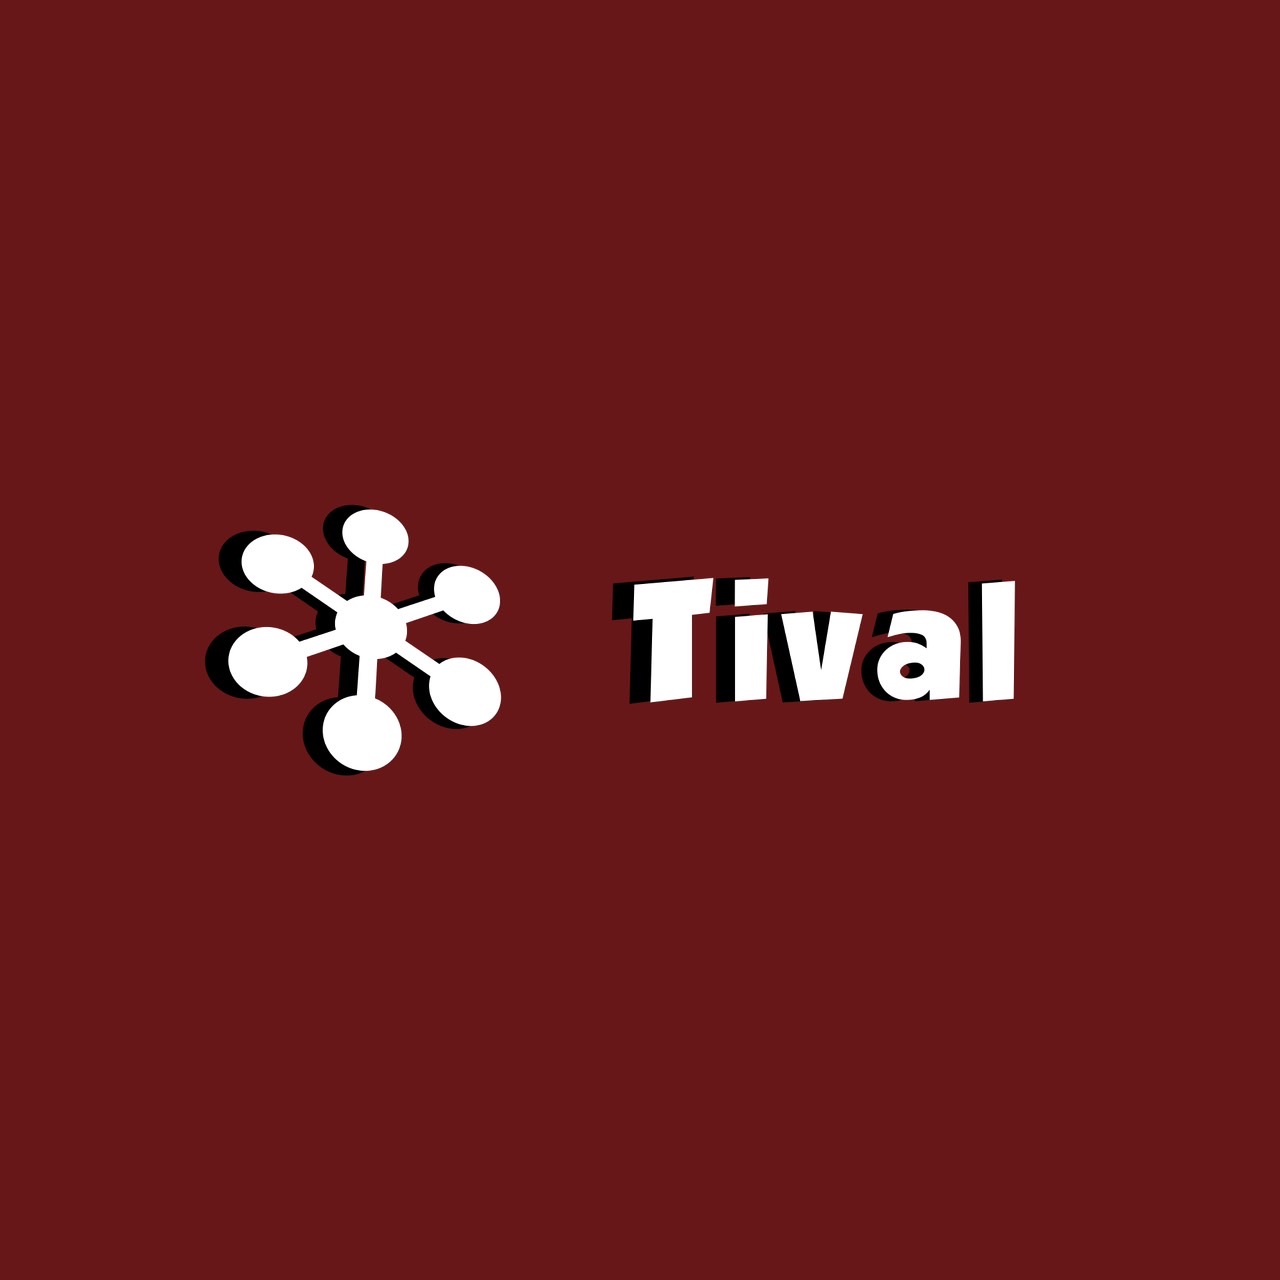 Tival